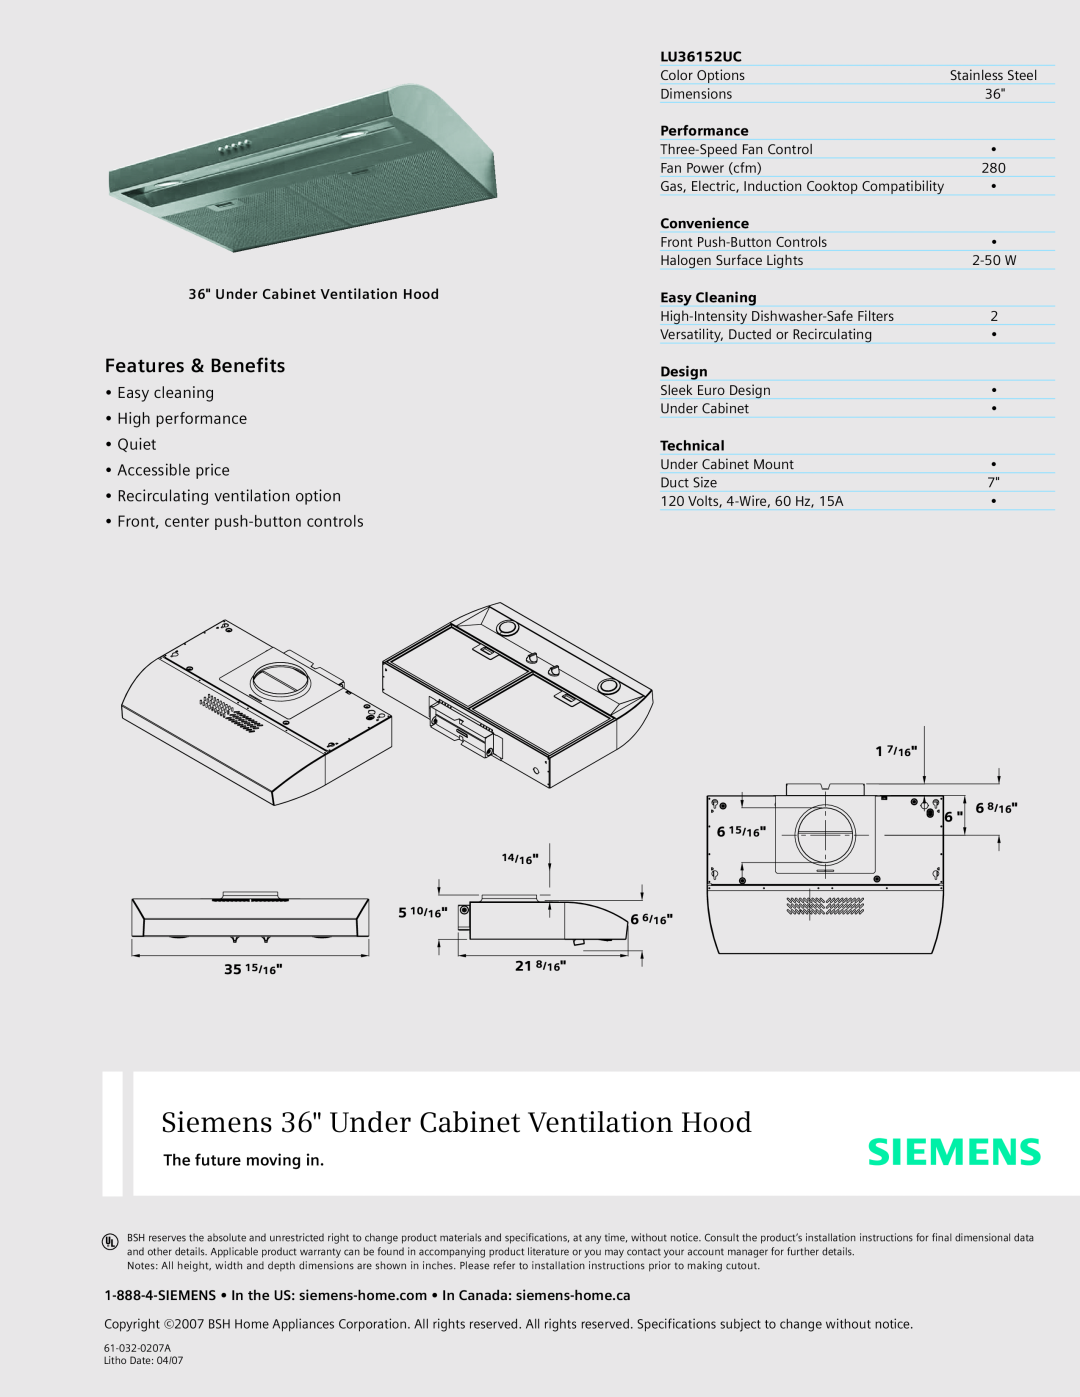 Siemens LU36152UC specifications Siemens 36 Under Cabinet Ventilation Hood, Features & Benefits, The future moving in 